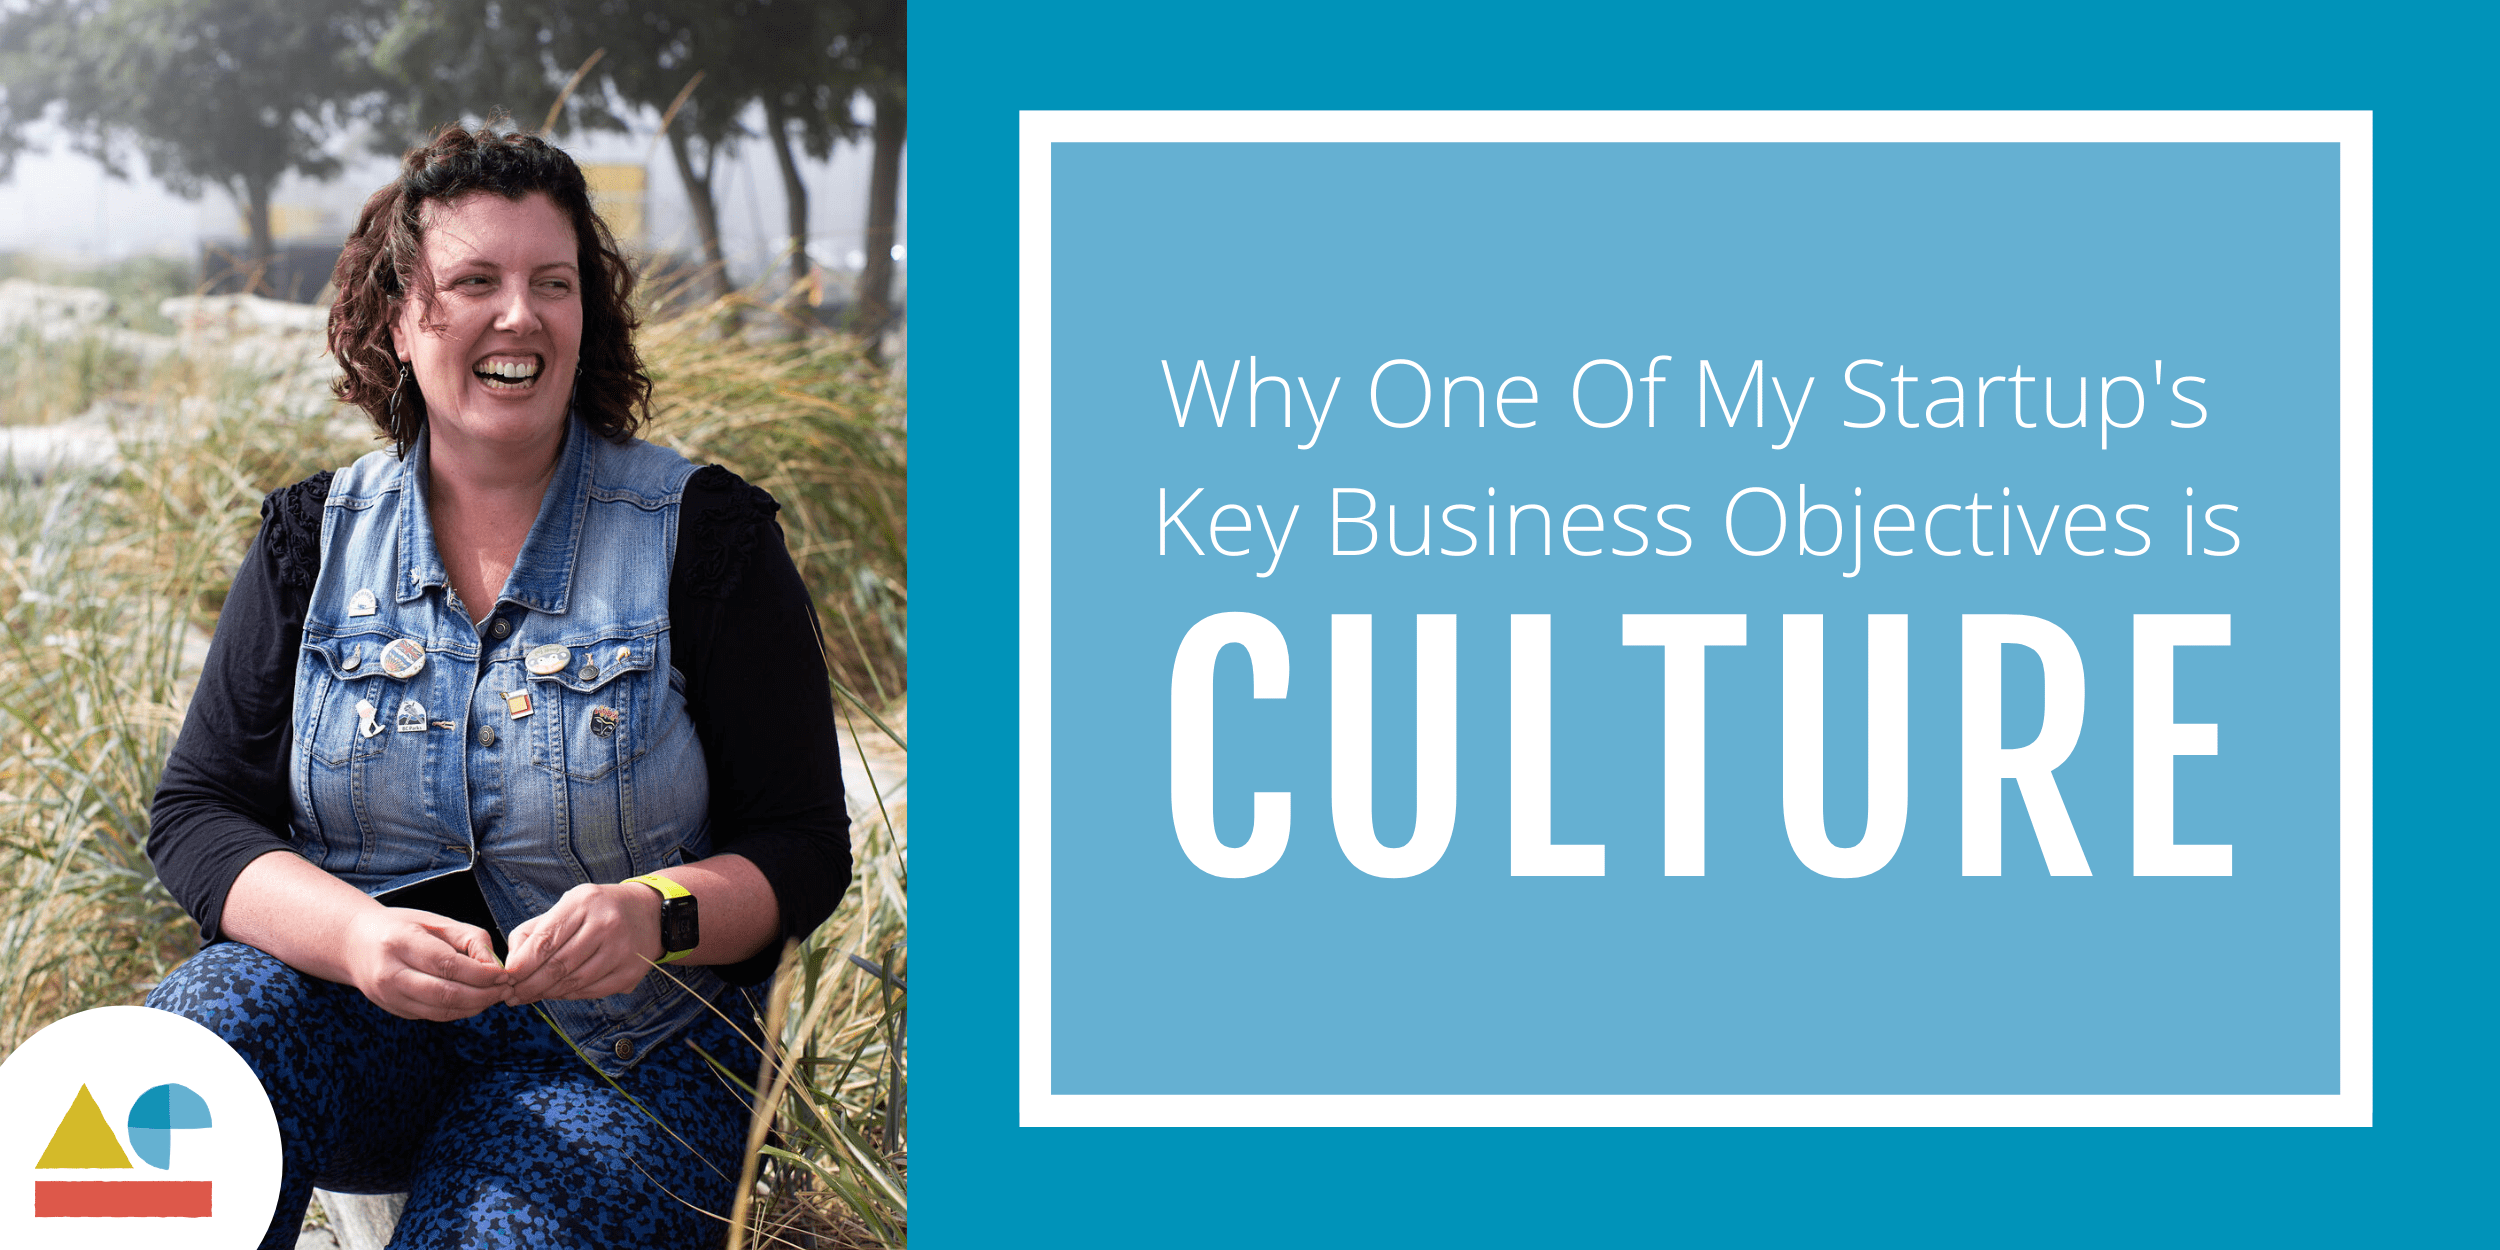 Why One Of My Startup’s Key 2020 Business Objectives is Culture